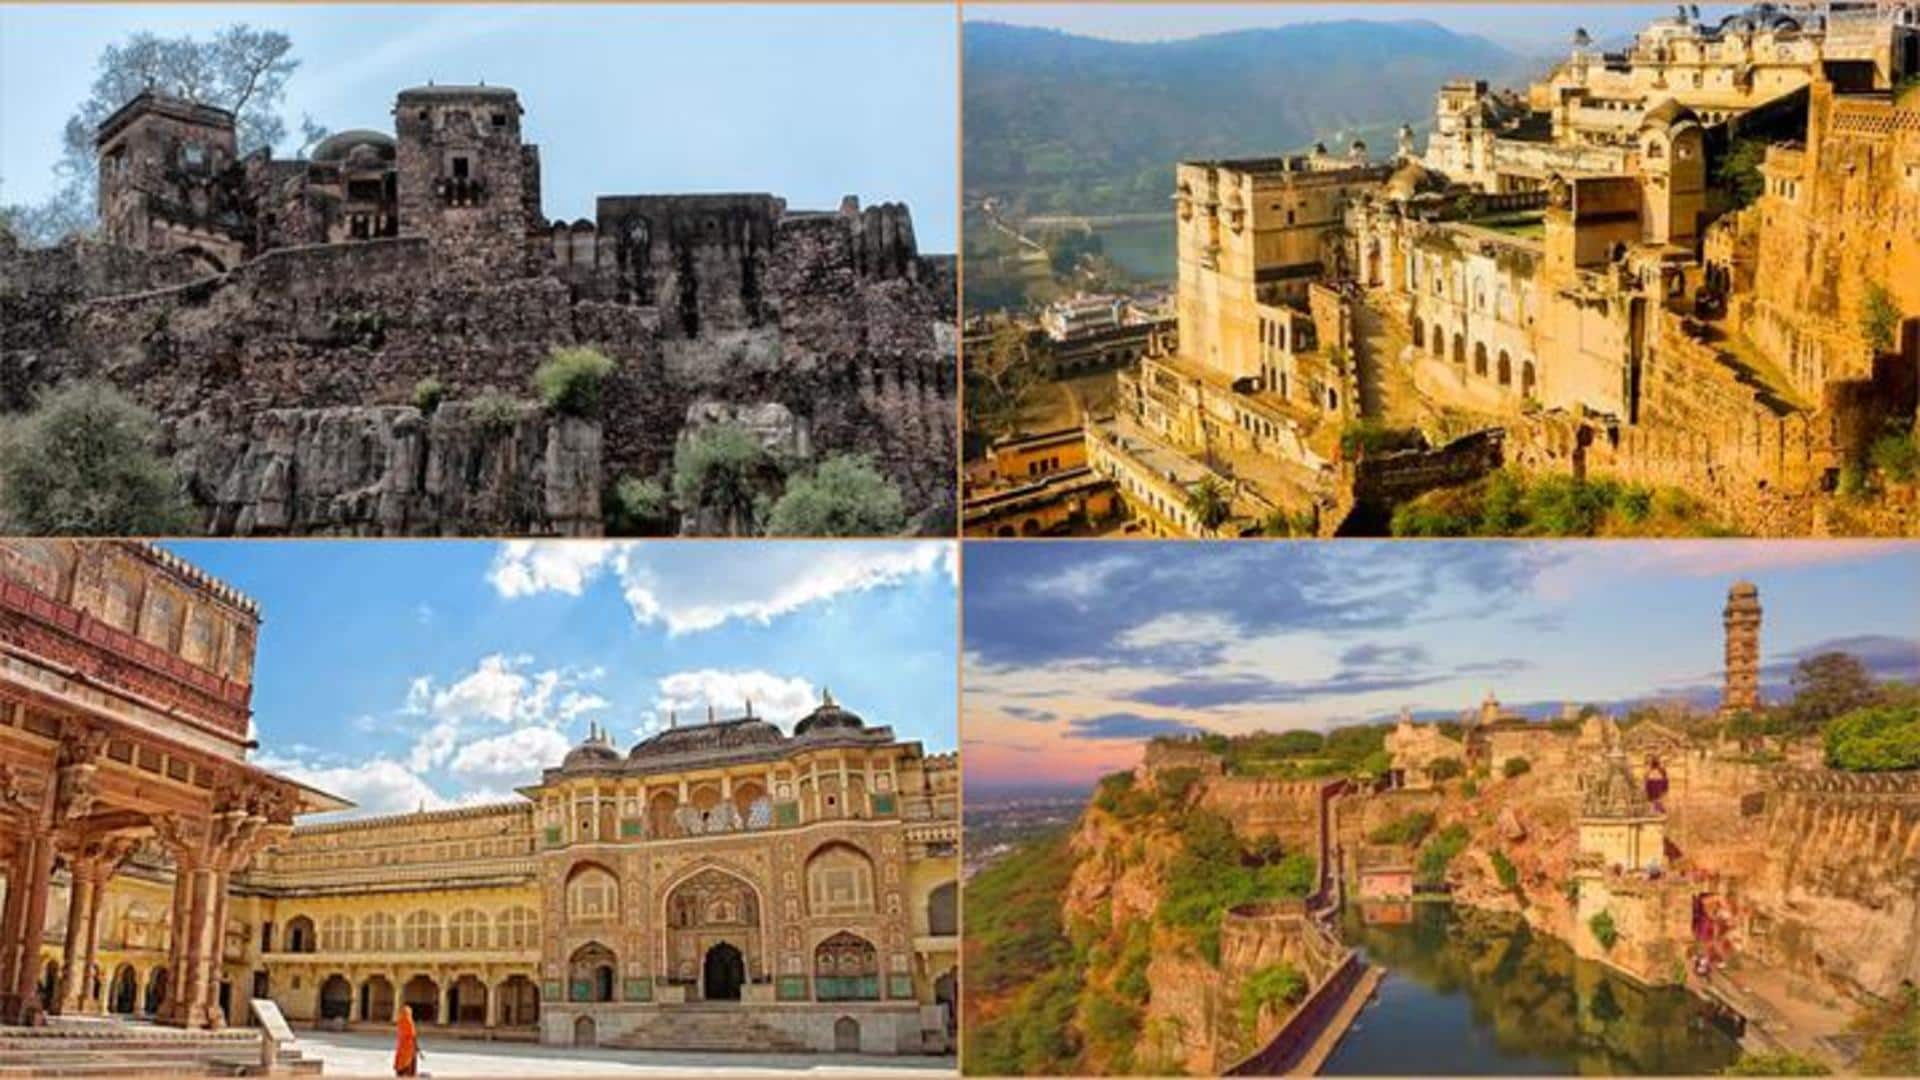 Don't forget to visit these royal forts when in Rajasthan